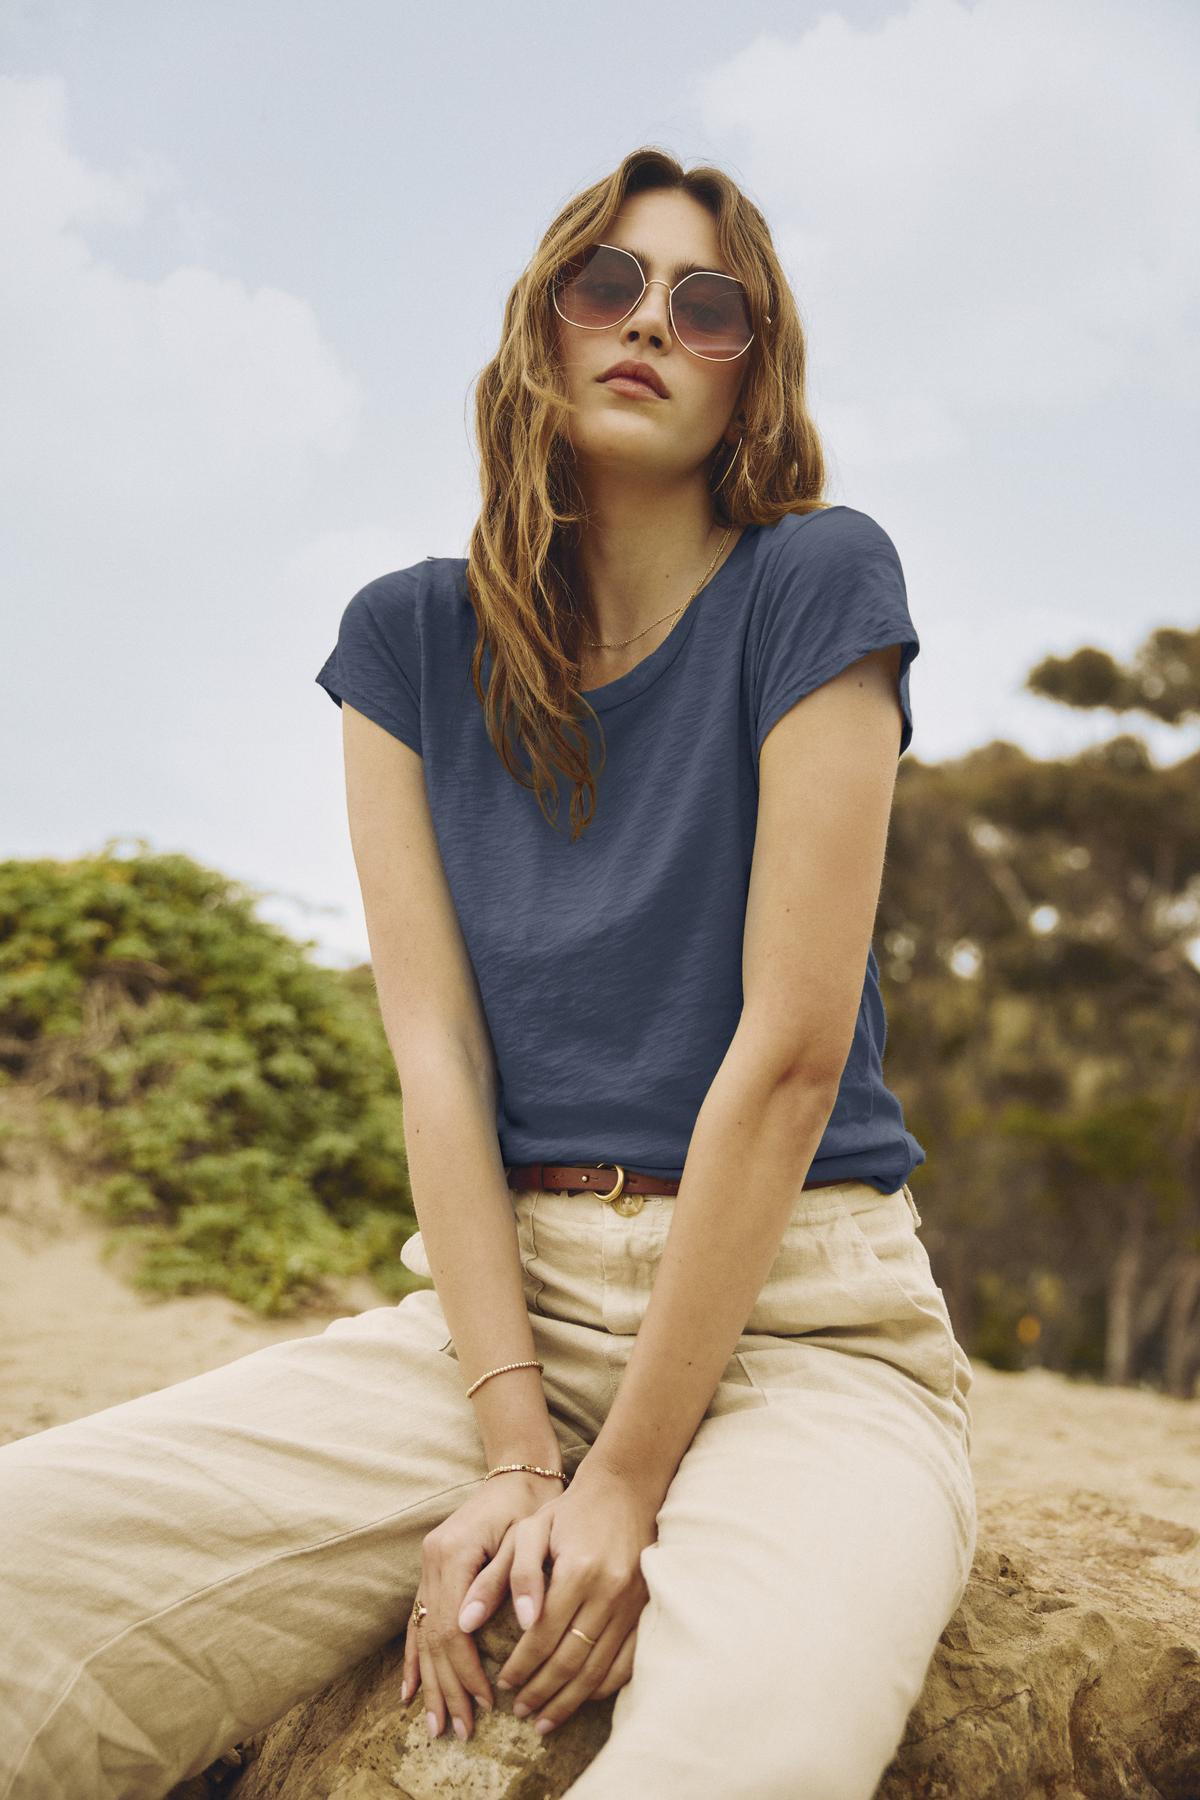 A person with wavy brown hair wearing sunglasses, a blue shirt made from premium cotton slub— the ODELIA TEE by Velvet by Graham & Spencer, a true wardrobe essential— and light-colored pants sits outdoors with a natural background.-37250157478081